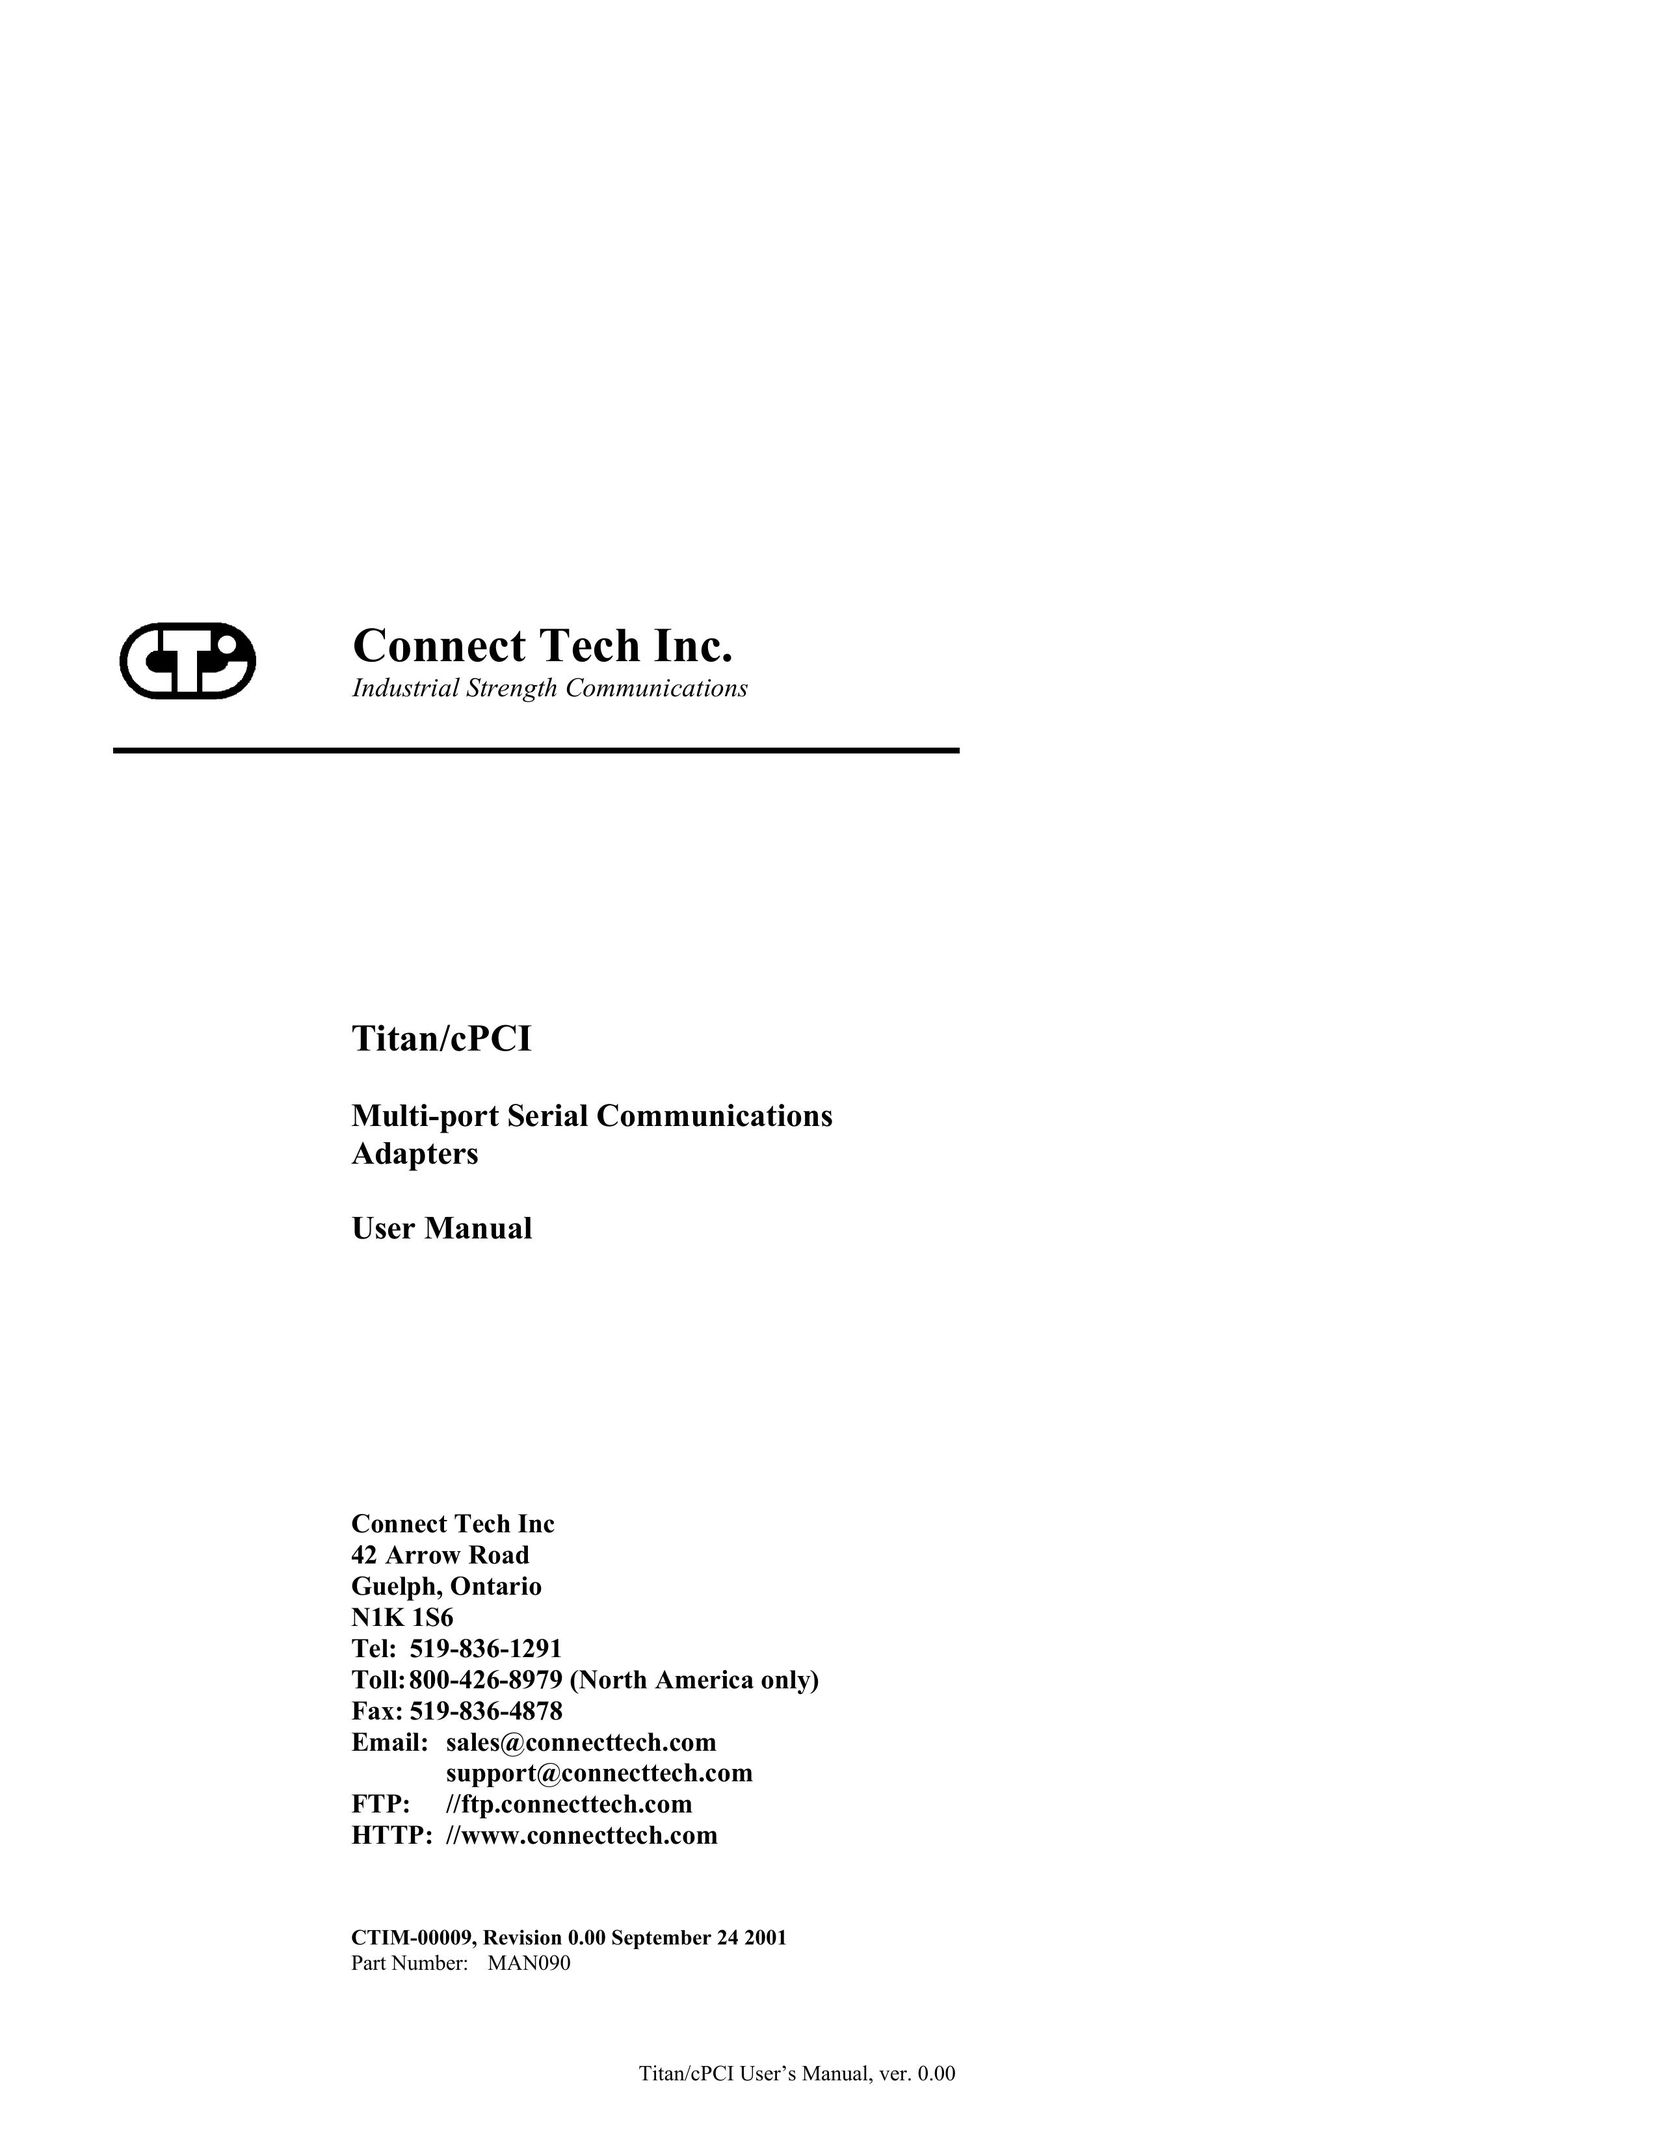 Connect Tech JB0 Network Card User Manual